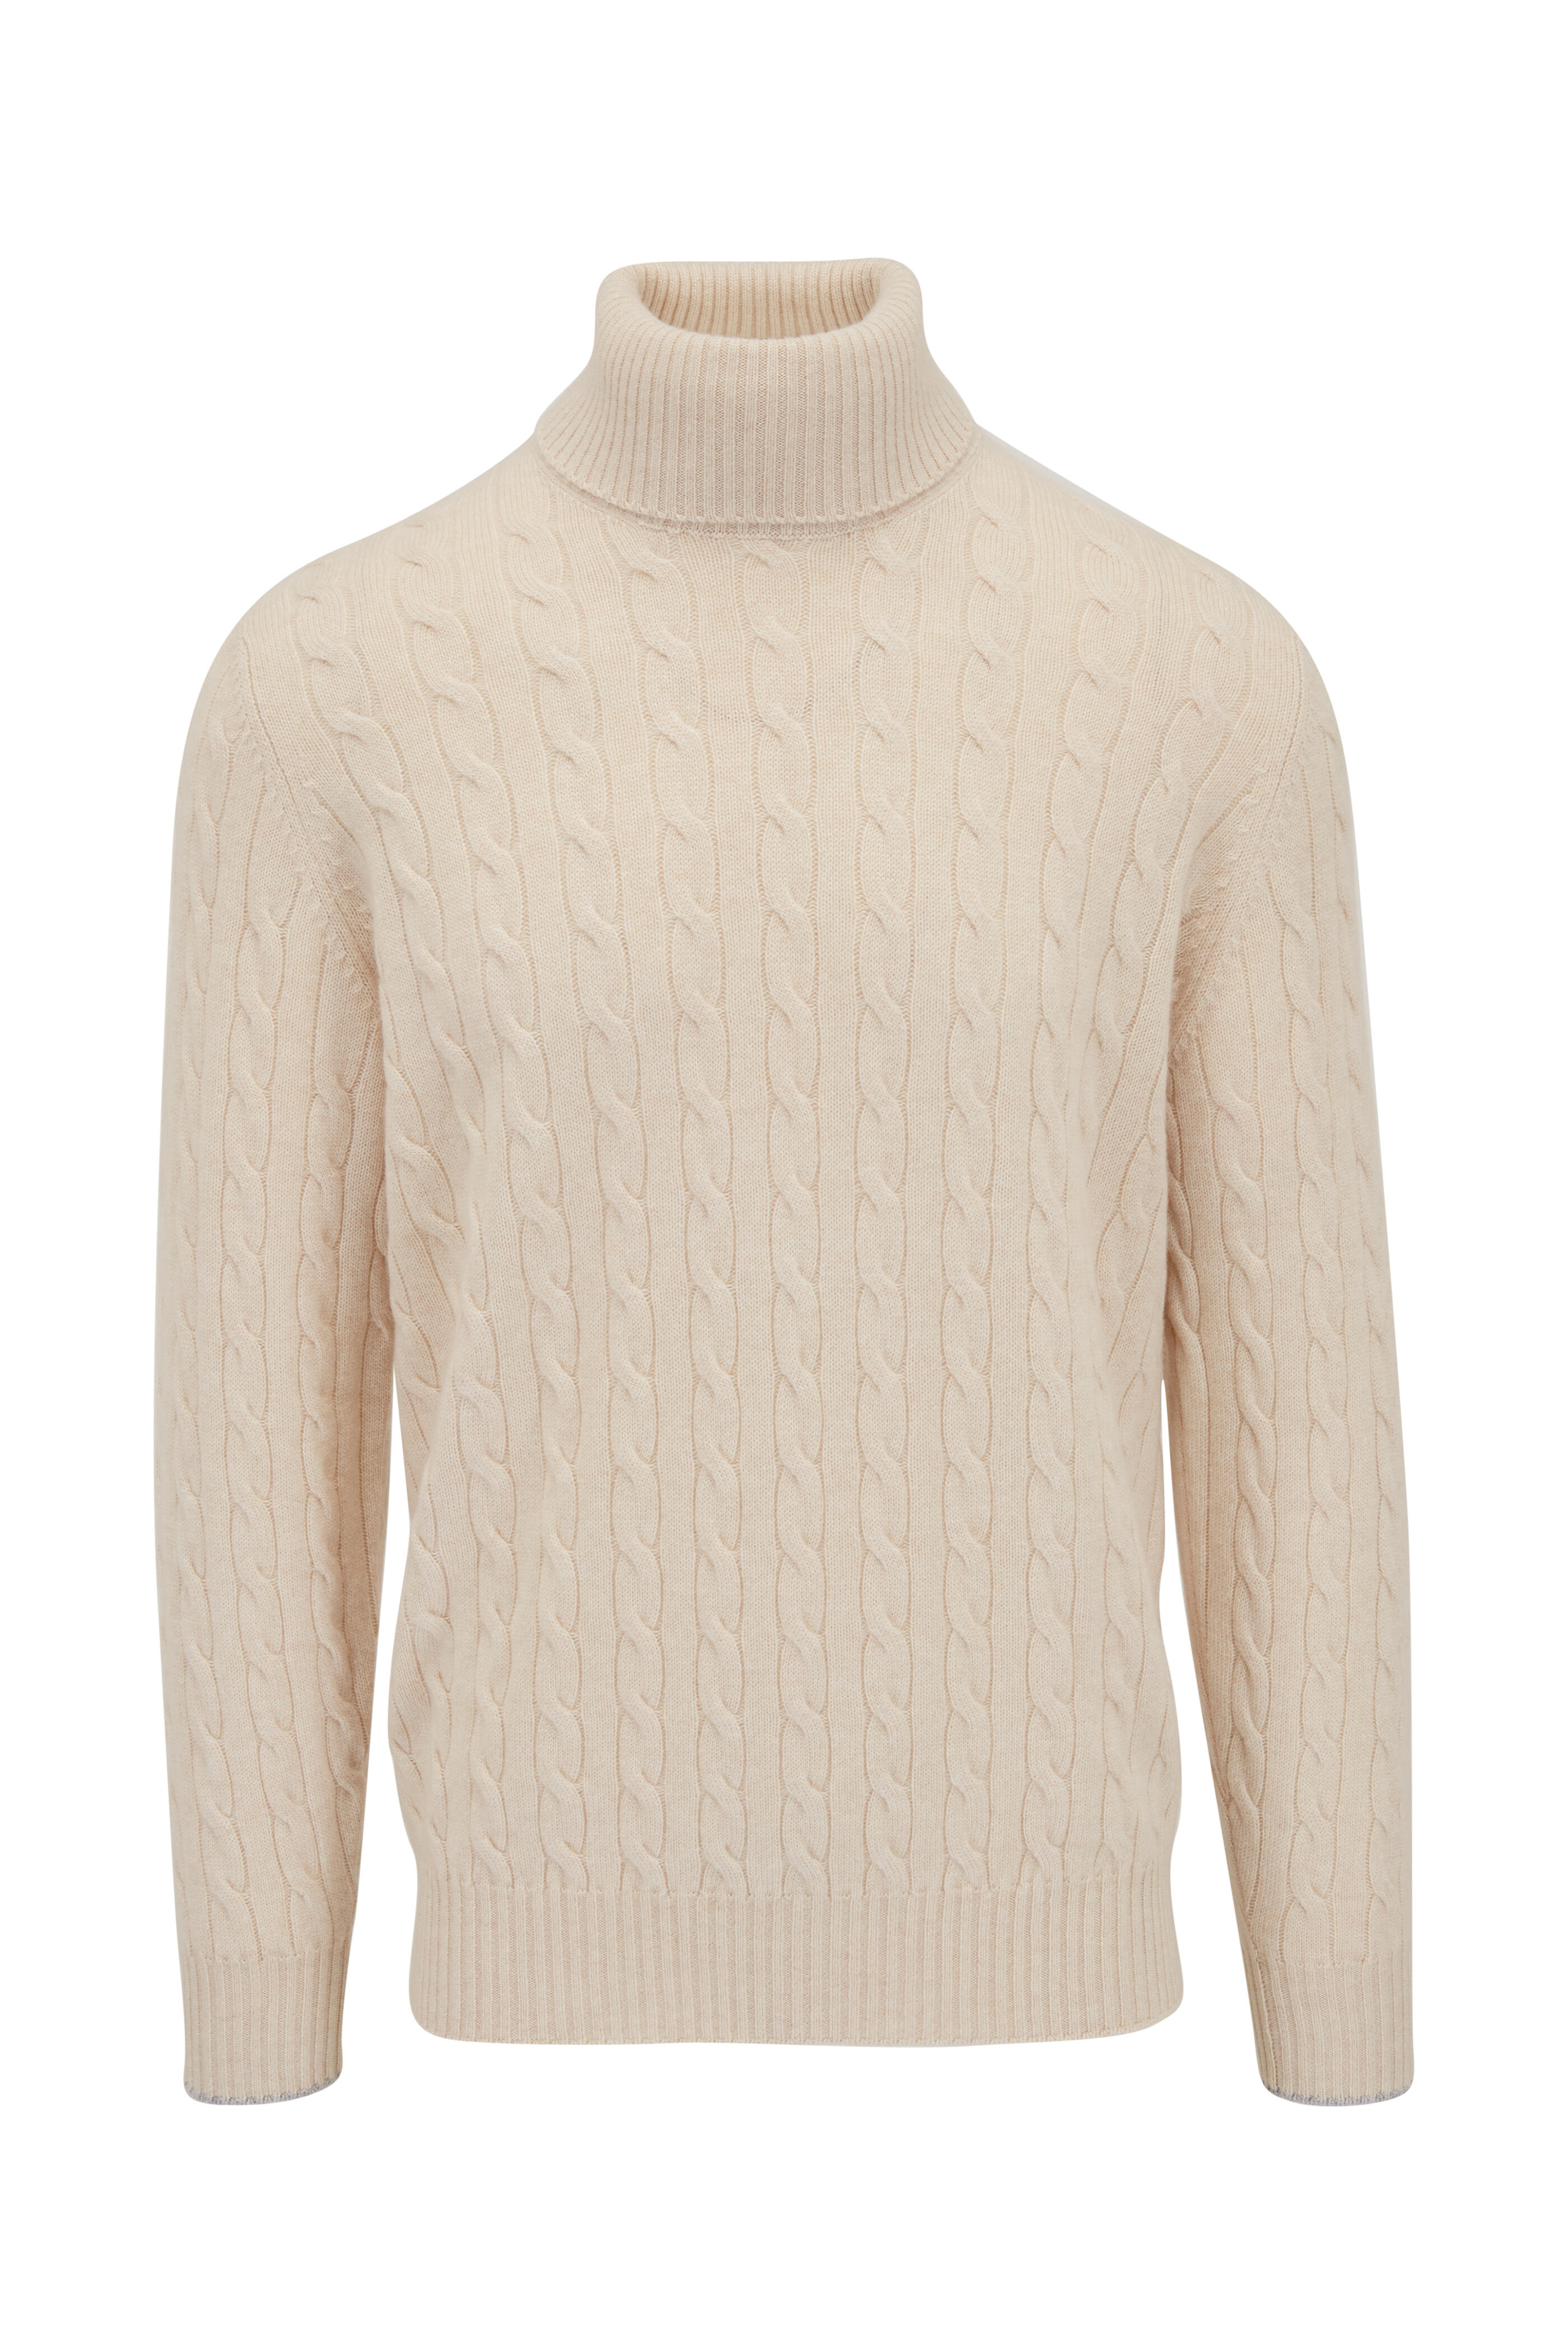 Italian Turtle Neck Cable Knitted Heart Jumper